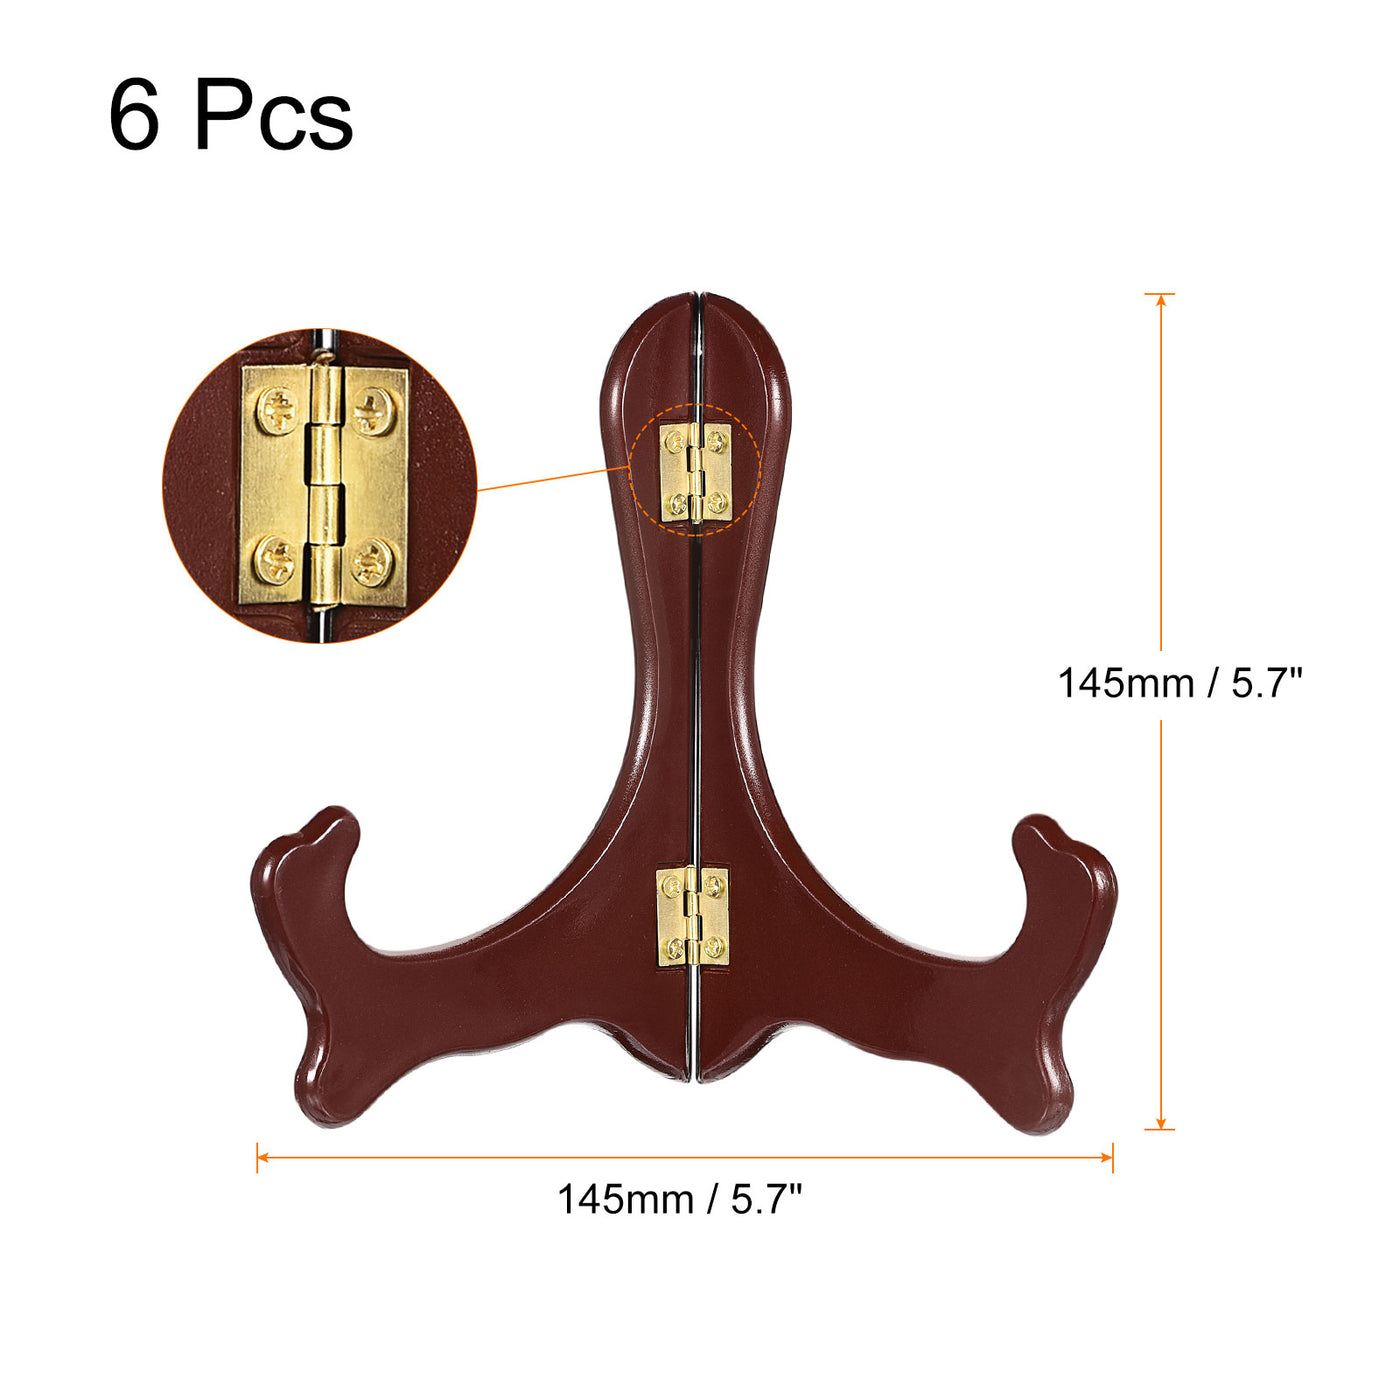 uxcell Uxcell 6pcs 5.7" Easel Plate Holder, Wood-like Plastic Folding Display Stand Brown for Decorative Picture Frame